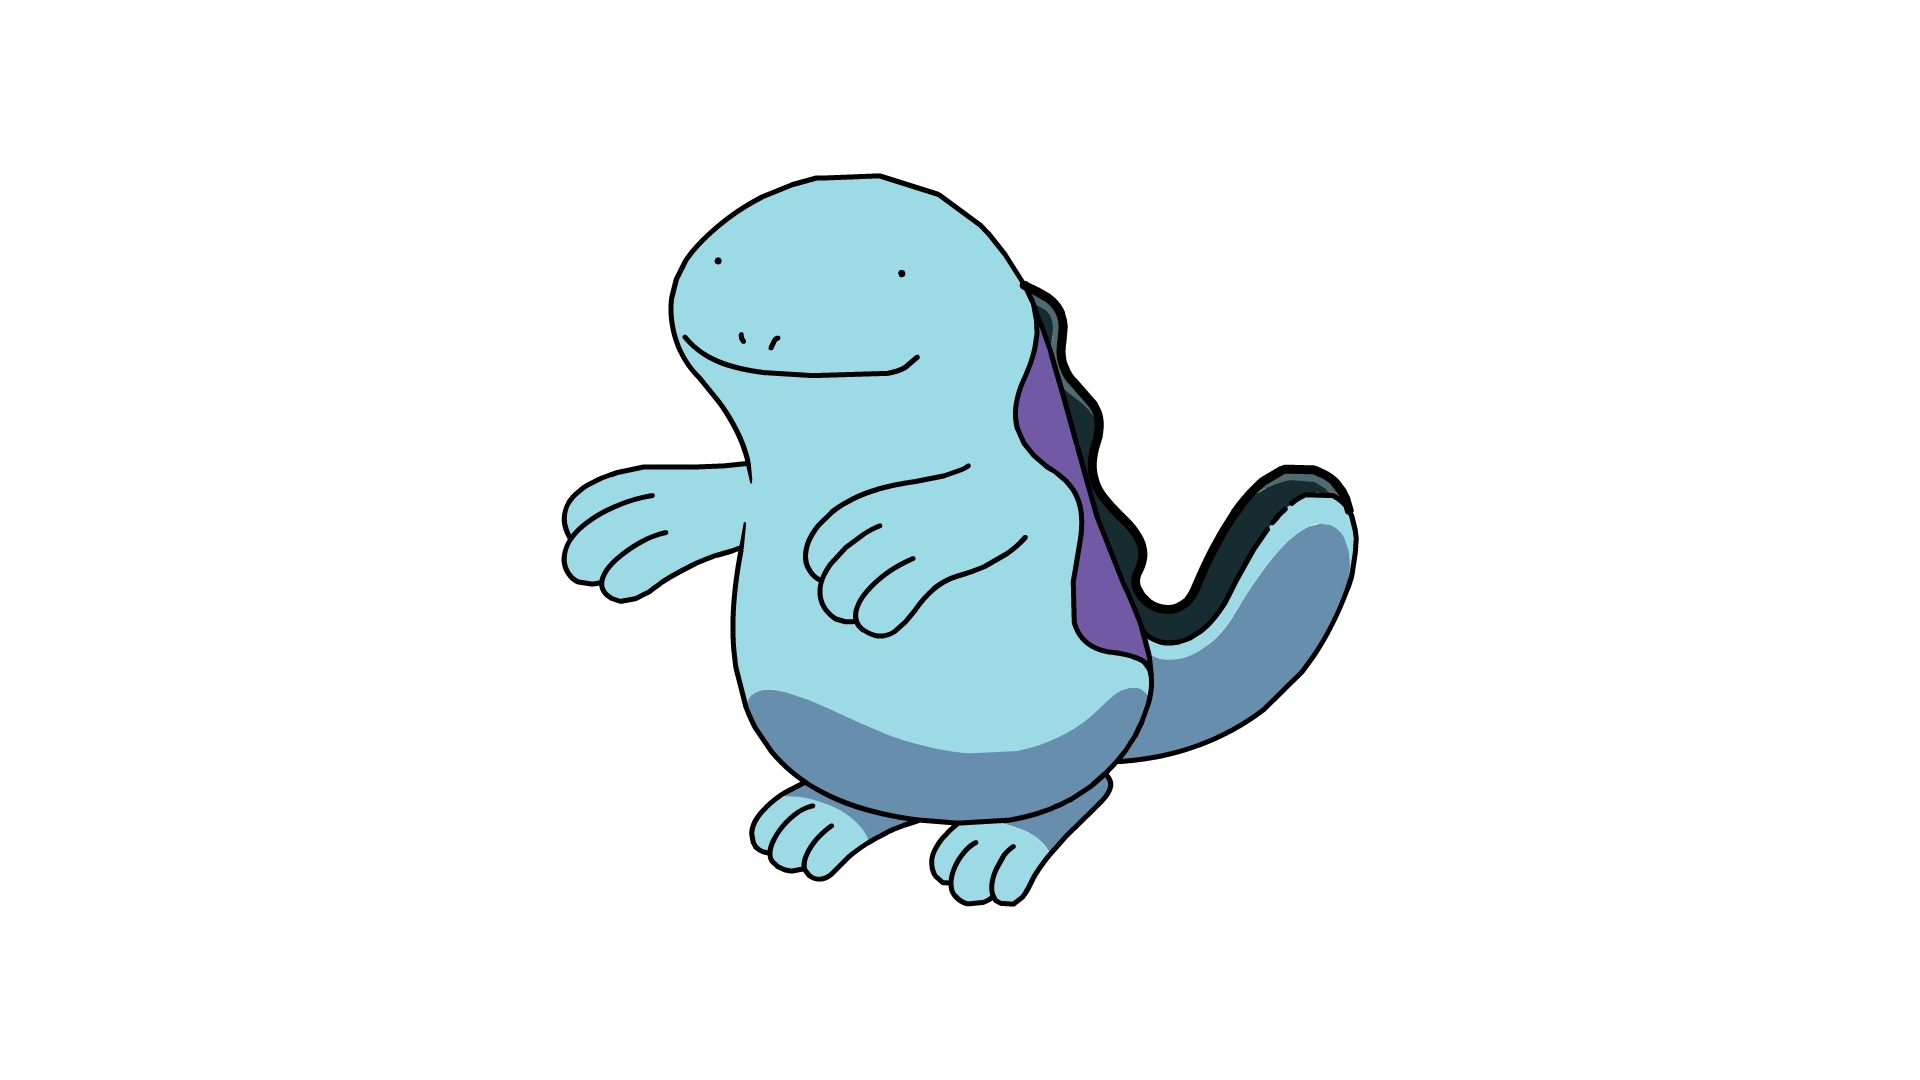 Quagsire Hd Wallpapers